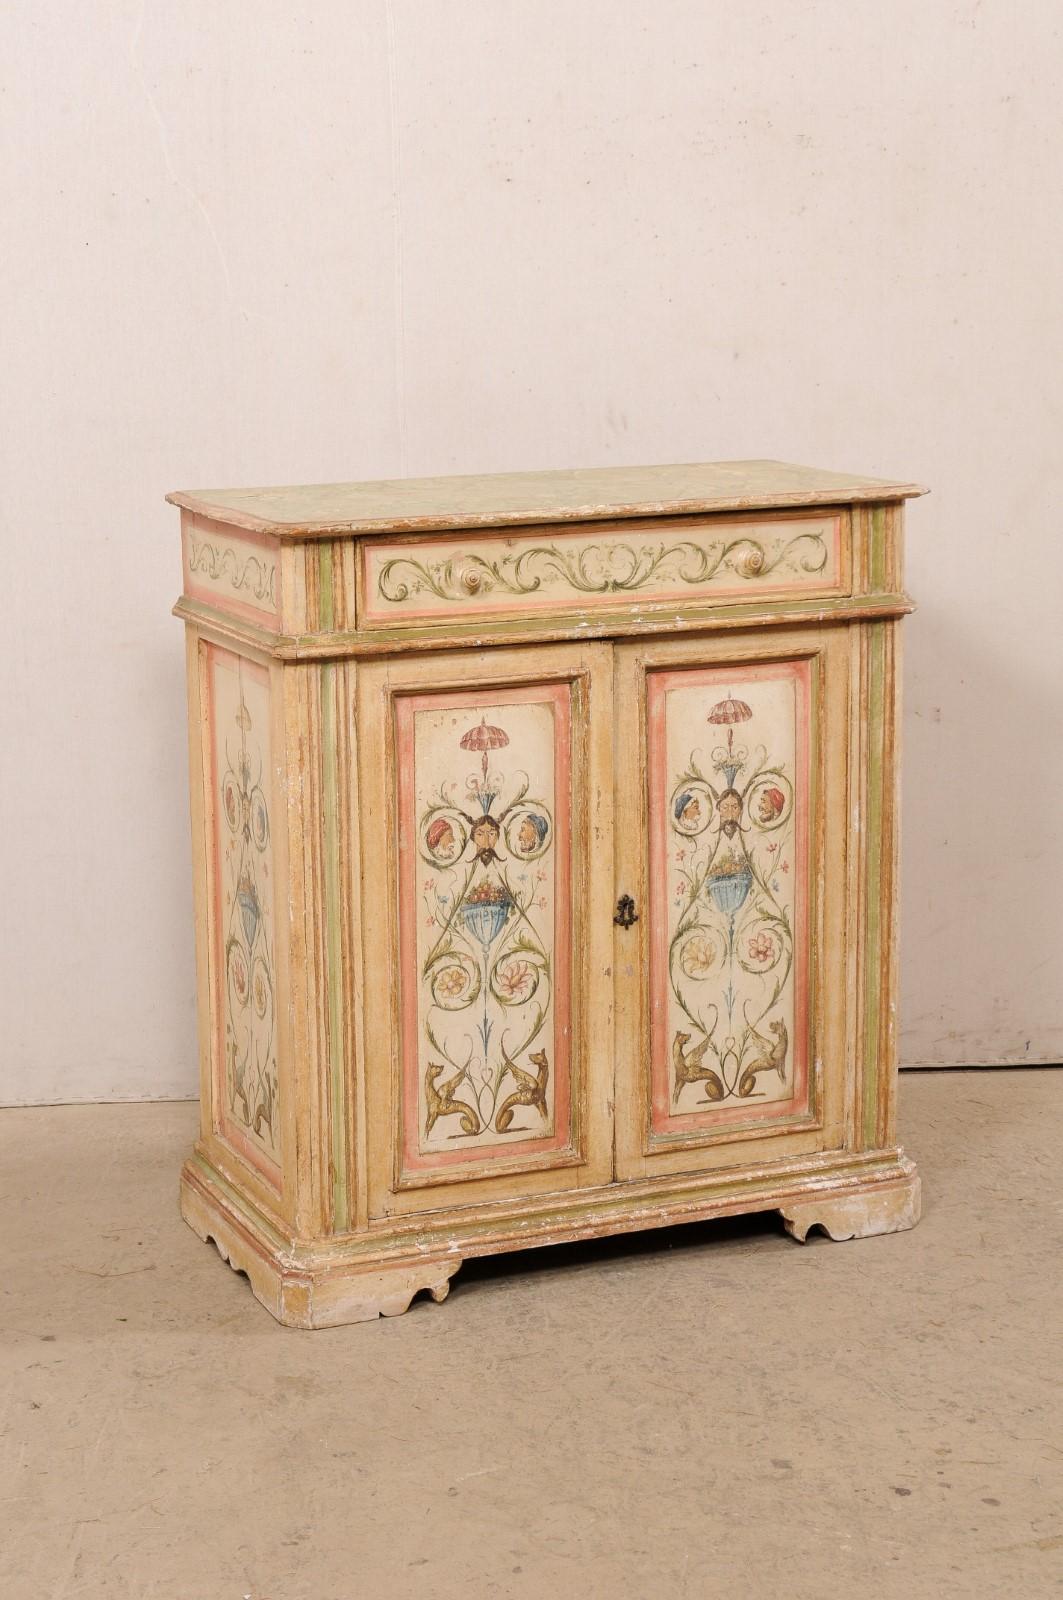 An Italian hand-painted cabinet from the 18th century. This antique cabinets from Italy has a rectangular-shaped top which slightly overhangs the case below which is fitted with a single top drawer over pair of doors. The exquisite hand-painted